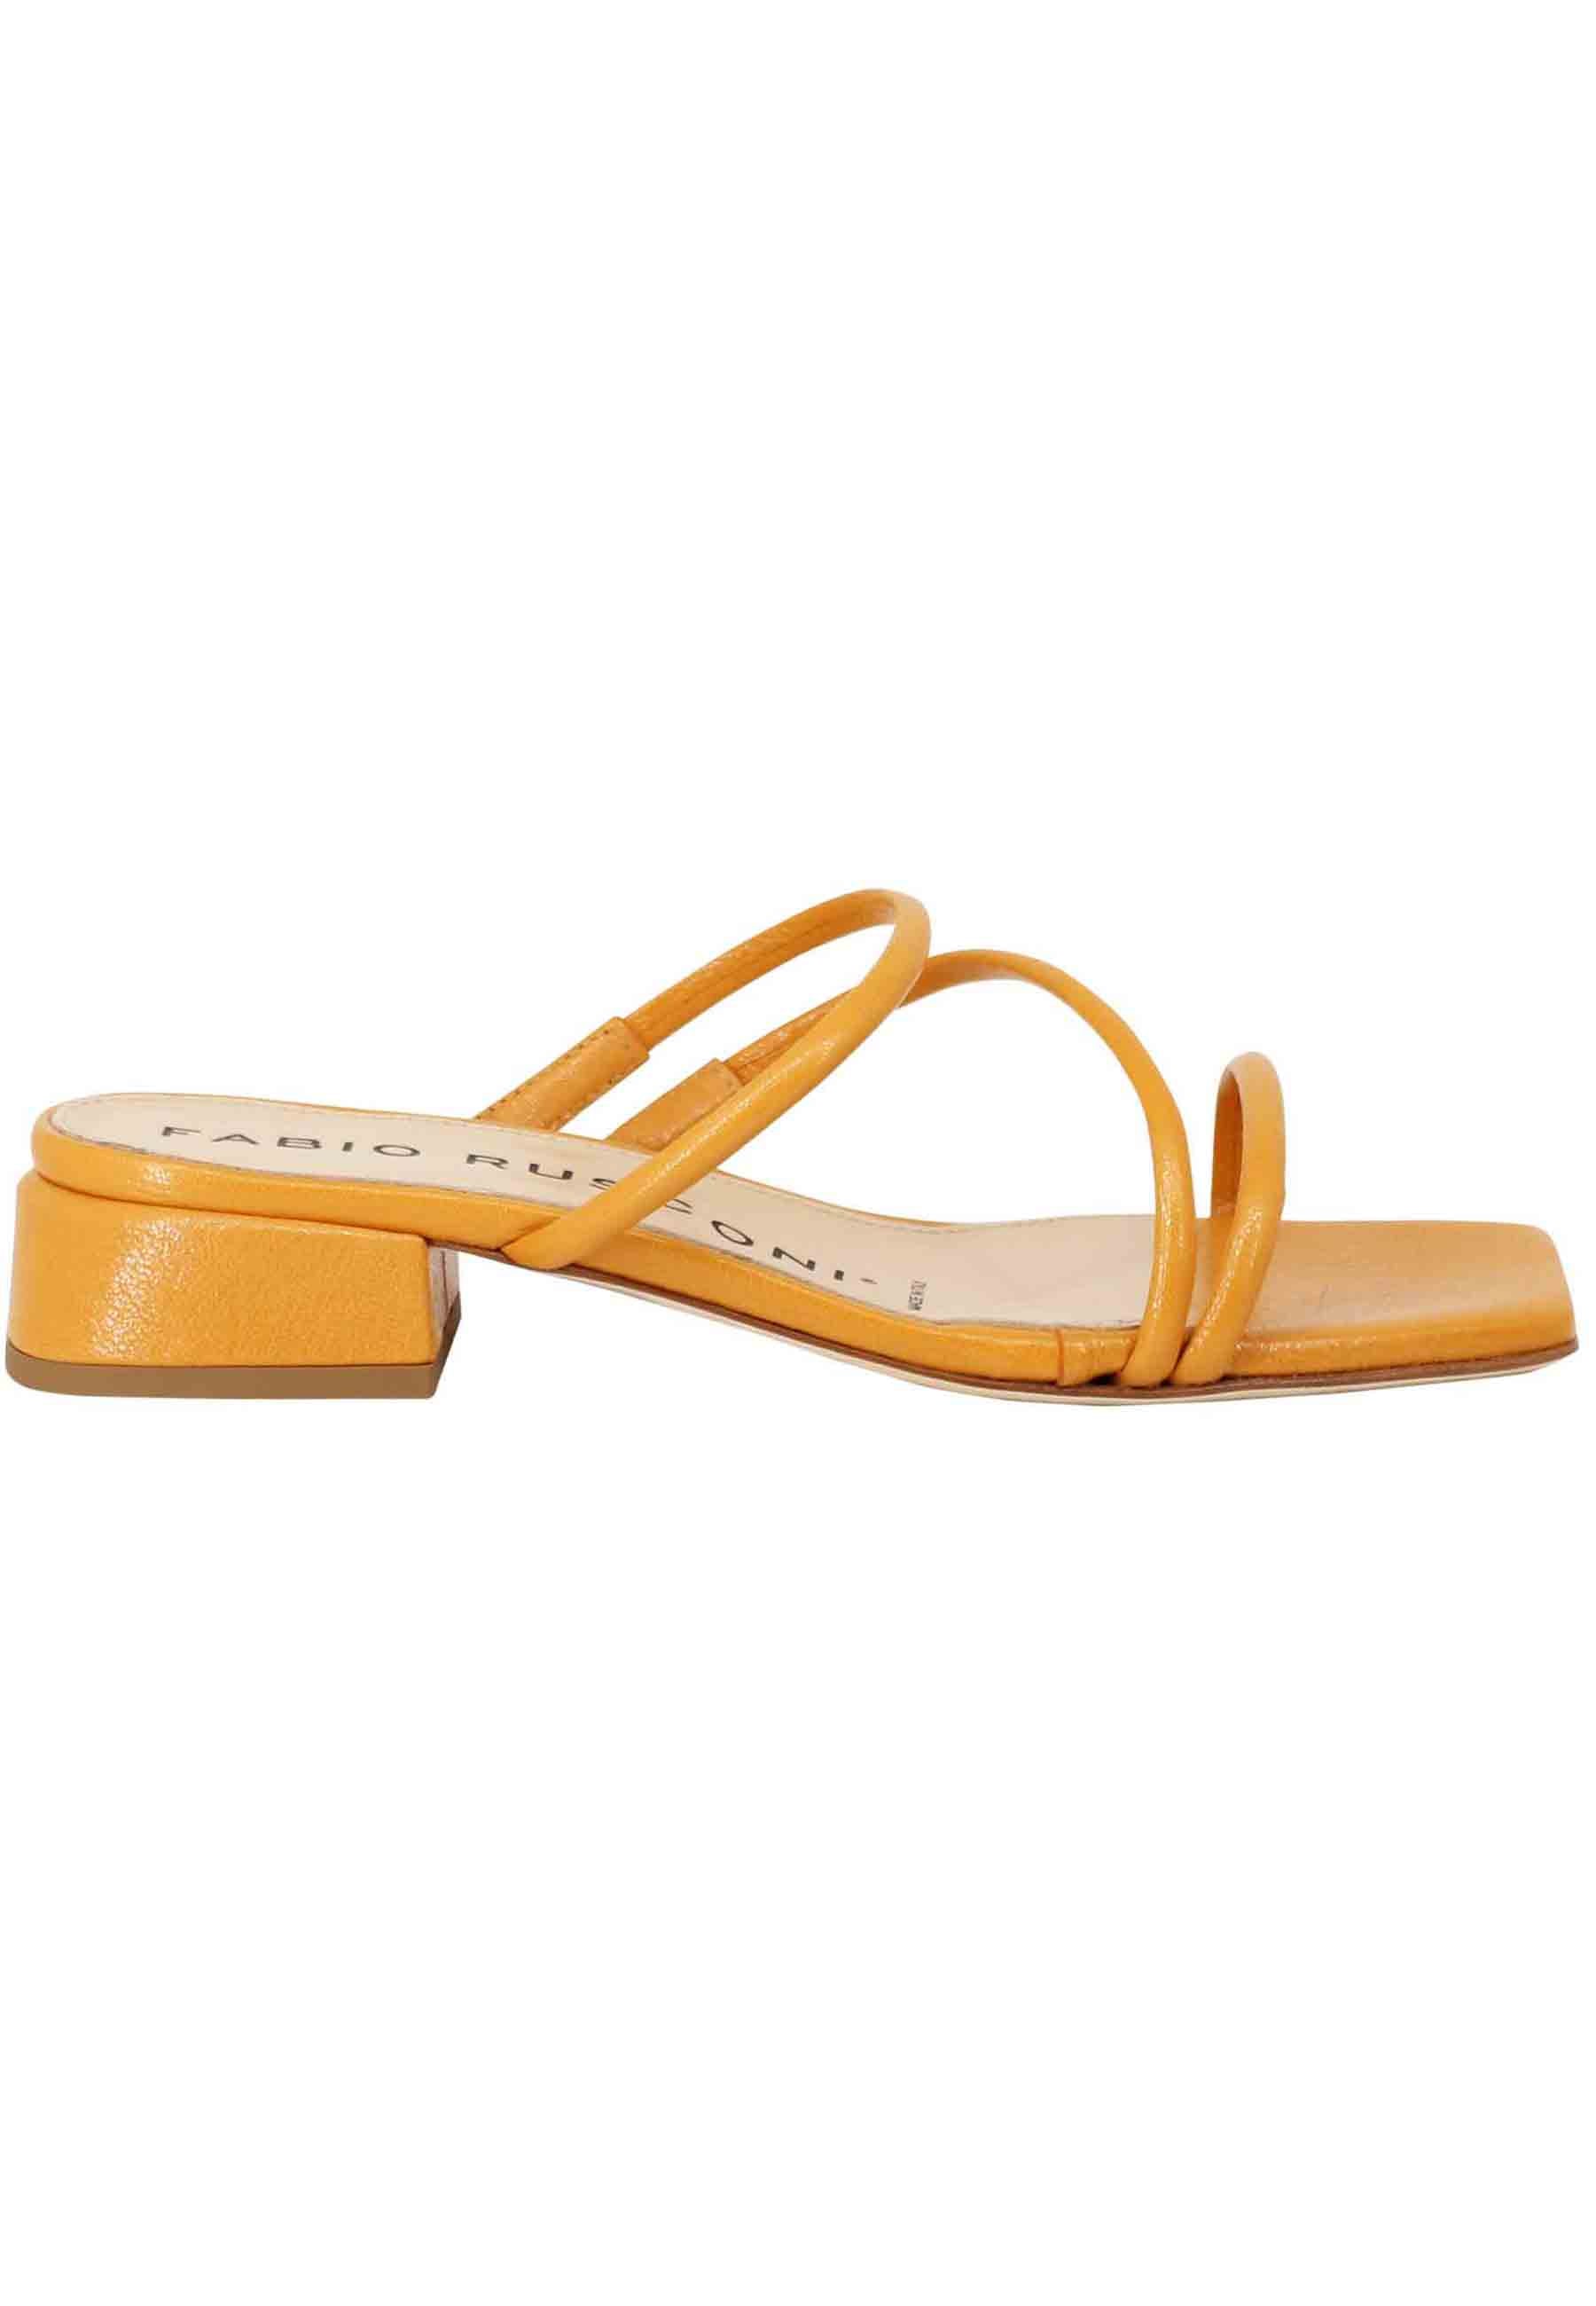 Women's mustard leather sandals with low heel and square toe